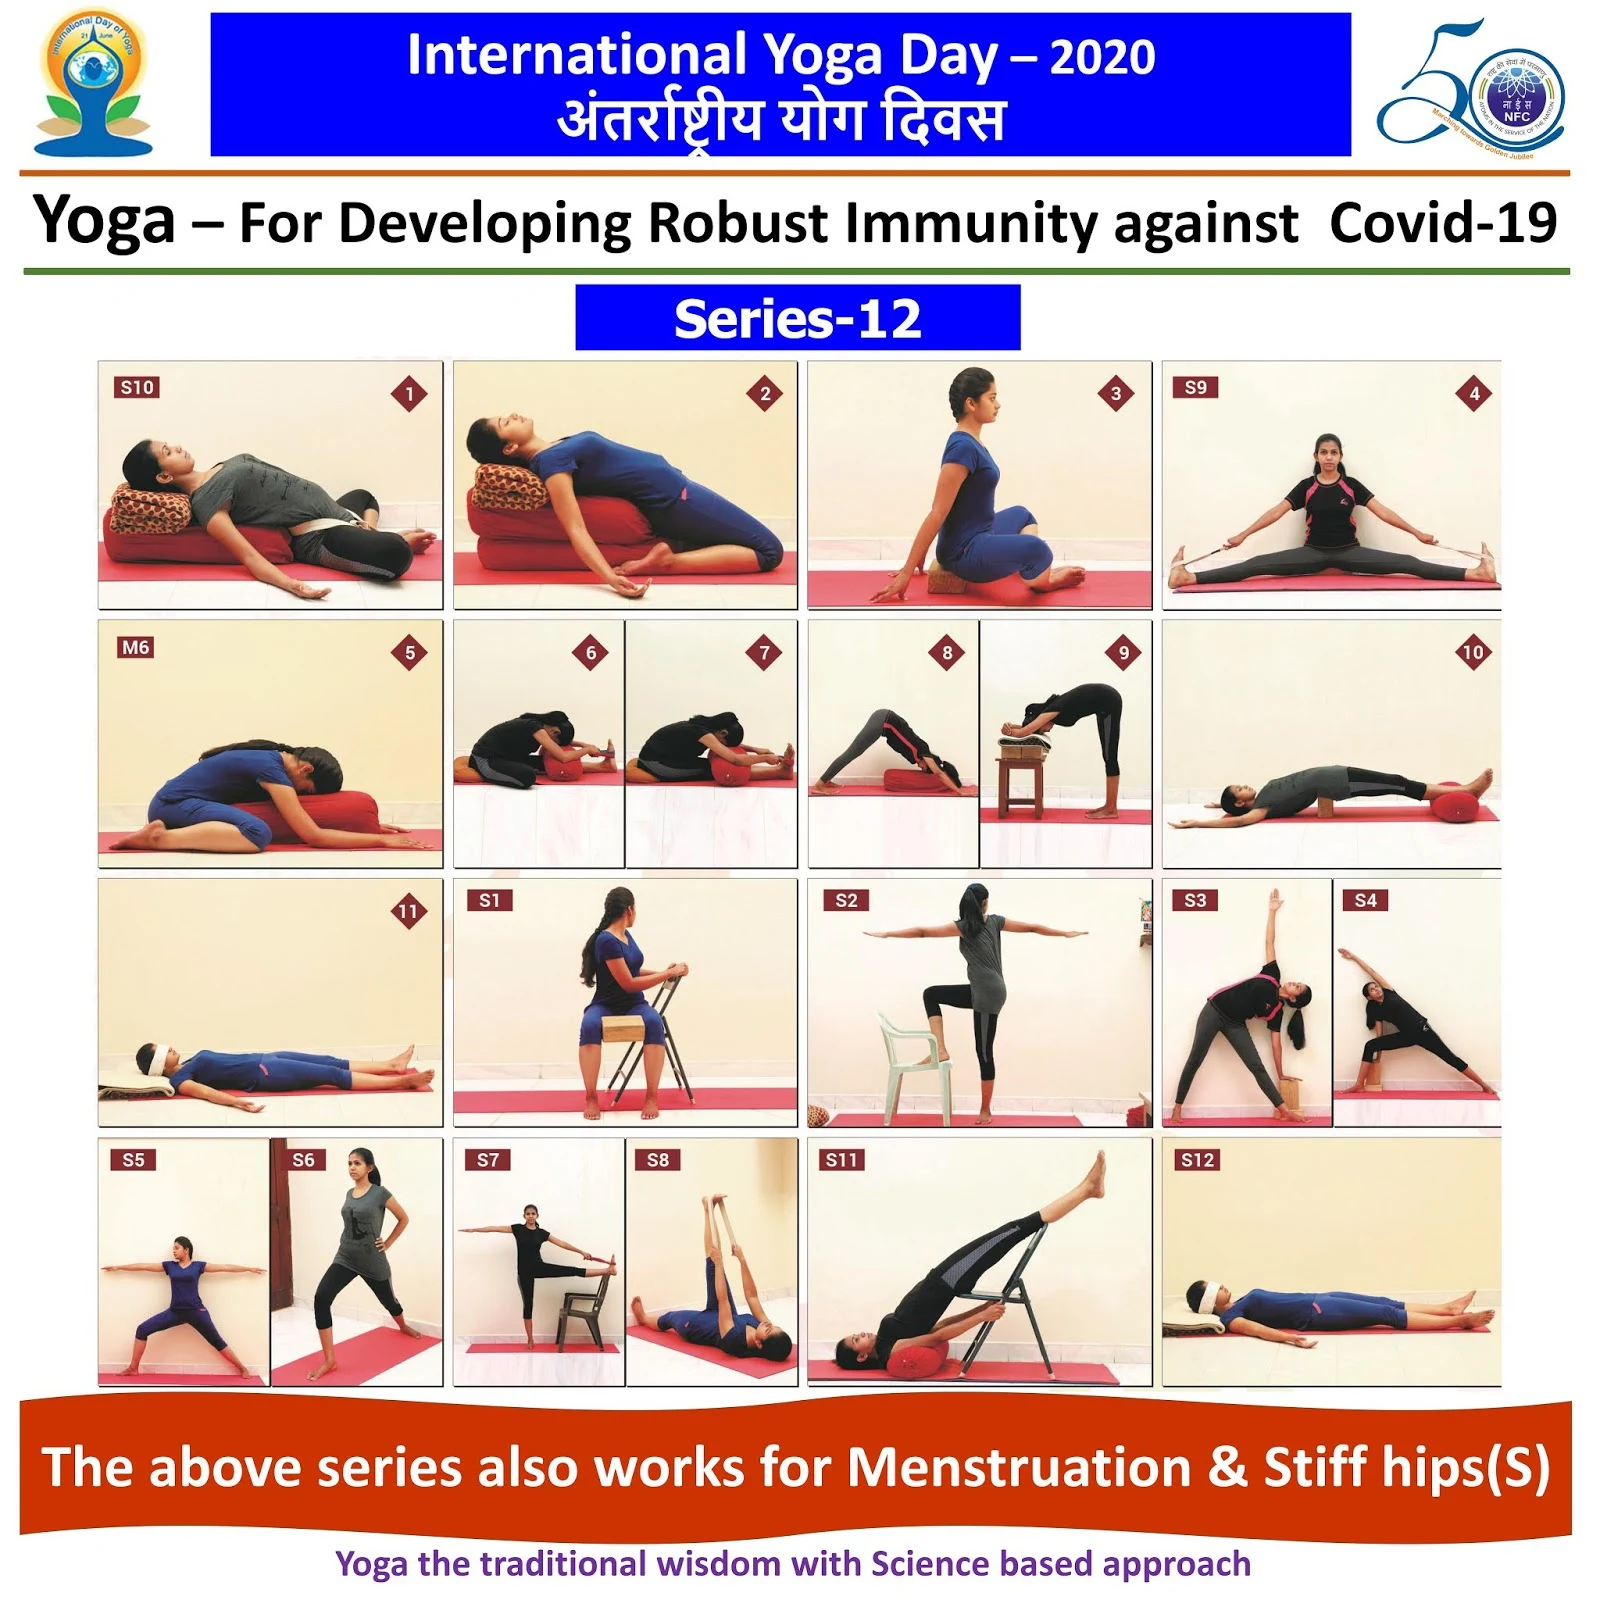 Happy International Yoga Day ... This series also works for Menstruation & Stiff hips(S)